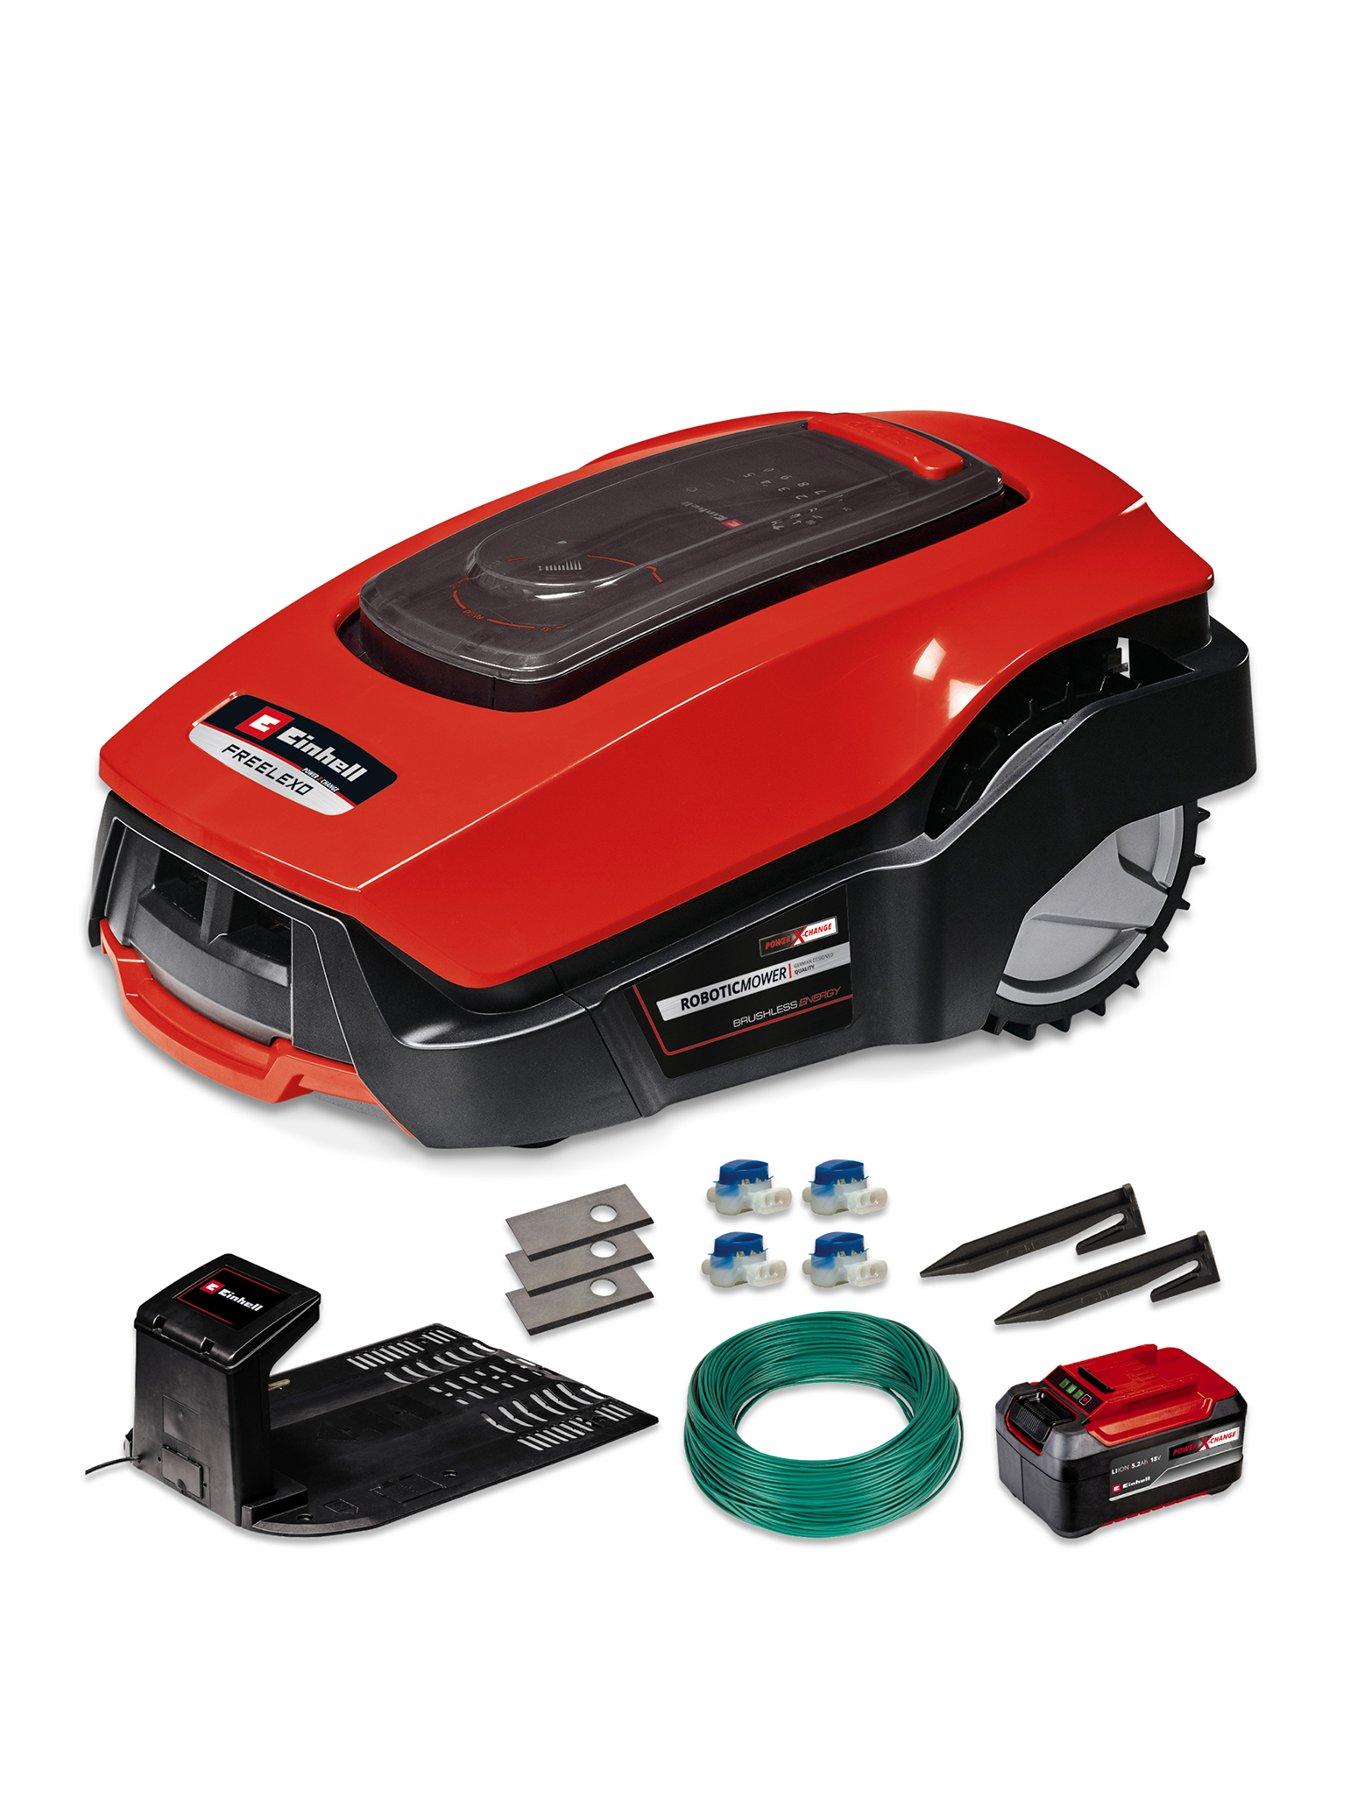 Einhell Pxc Cordless Robotic Lawn Mower - Freelexo 1200 Lcd Bt (18V Includes Battery)